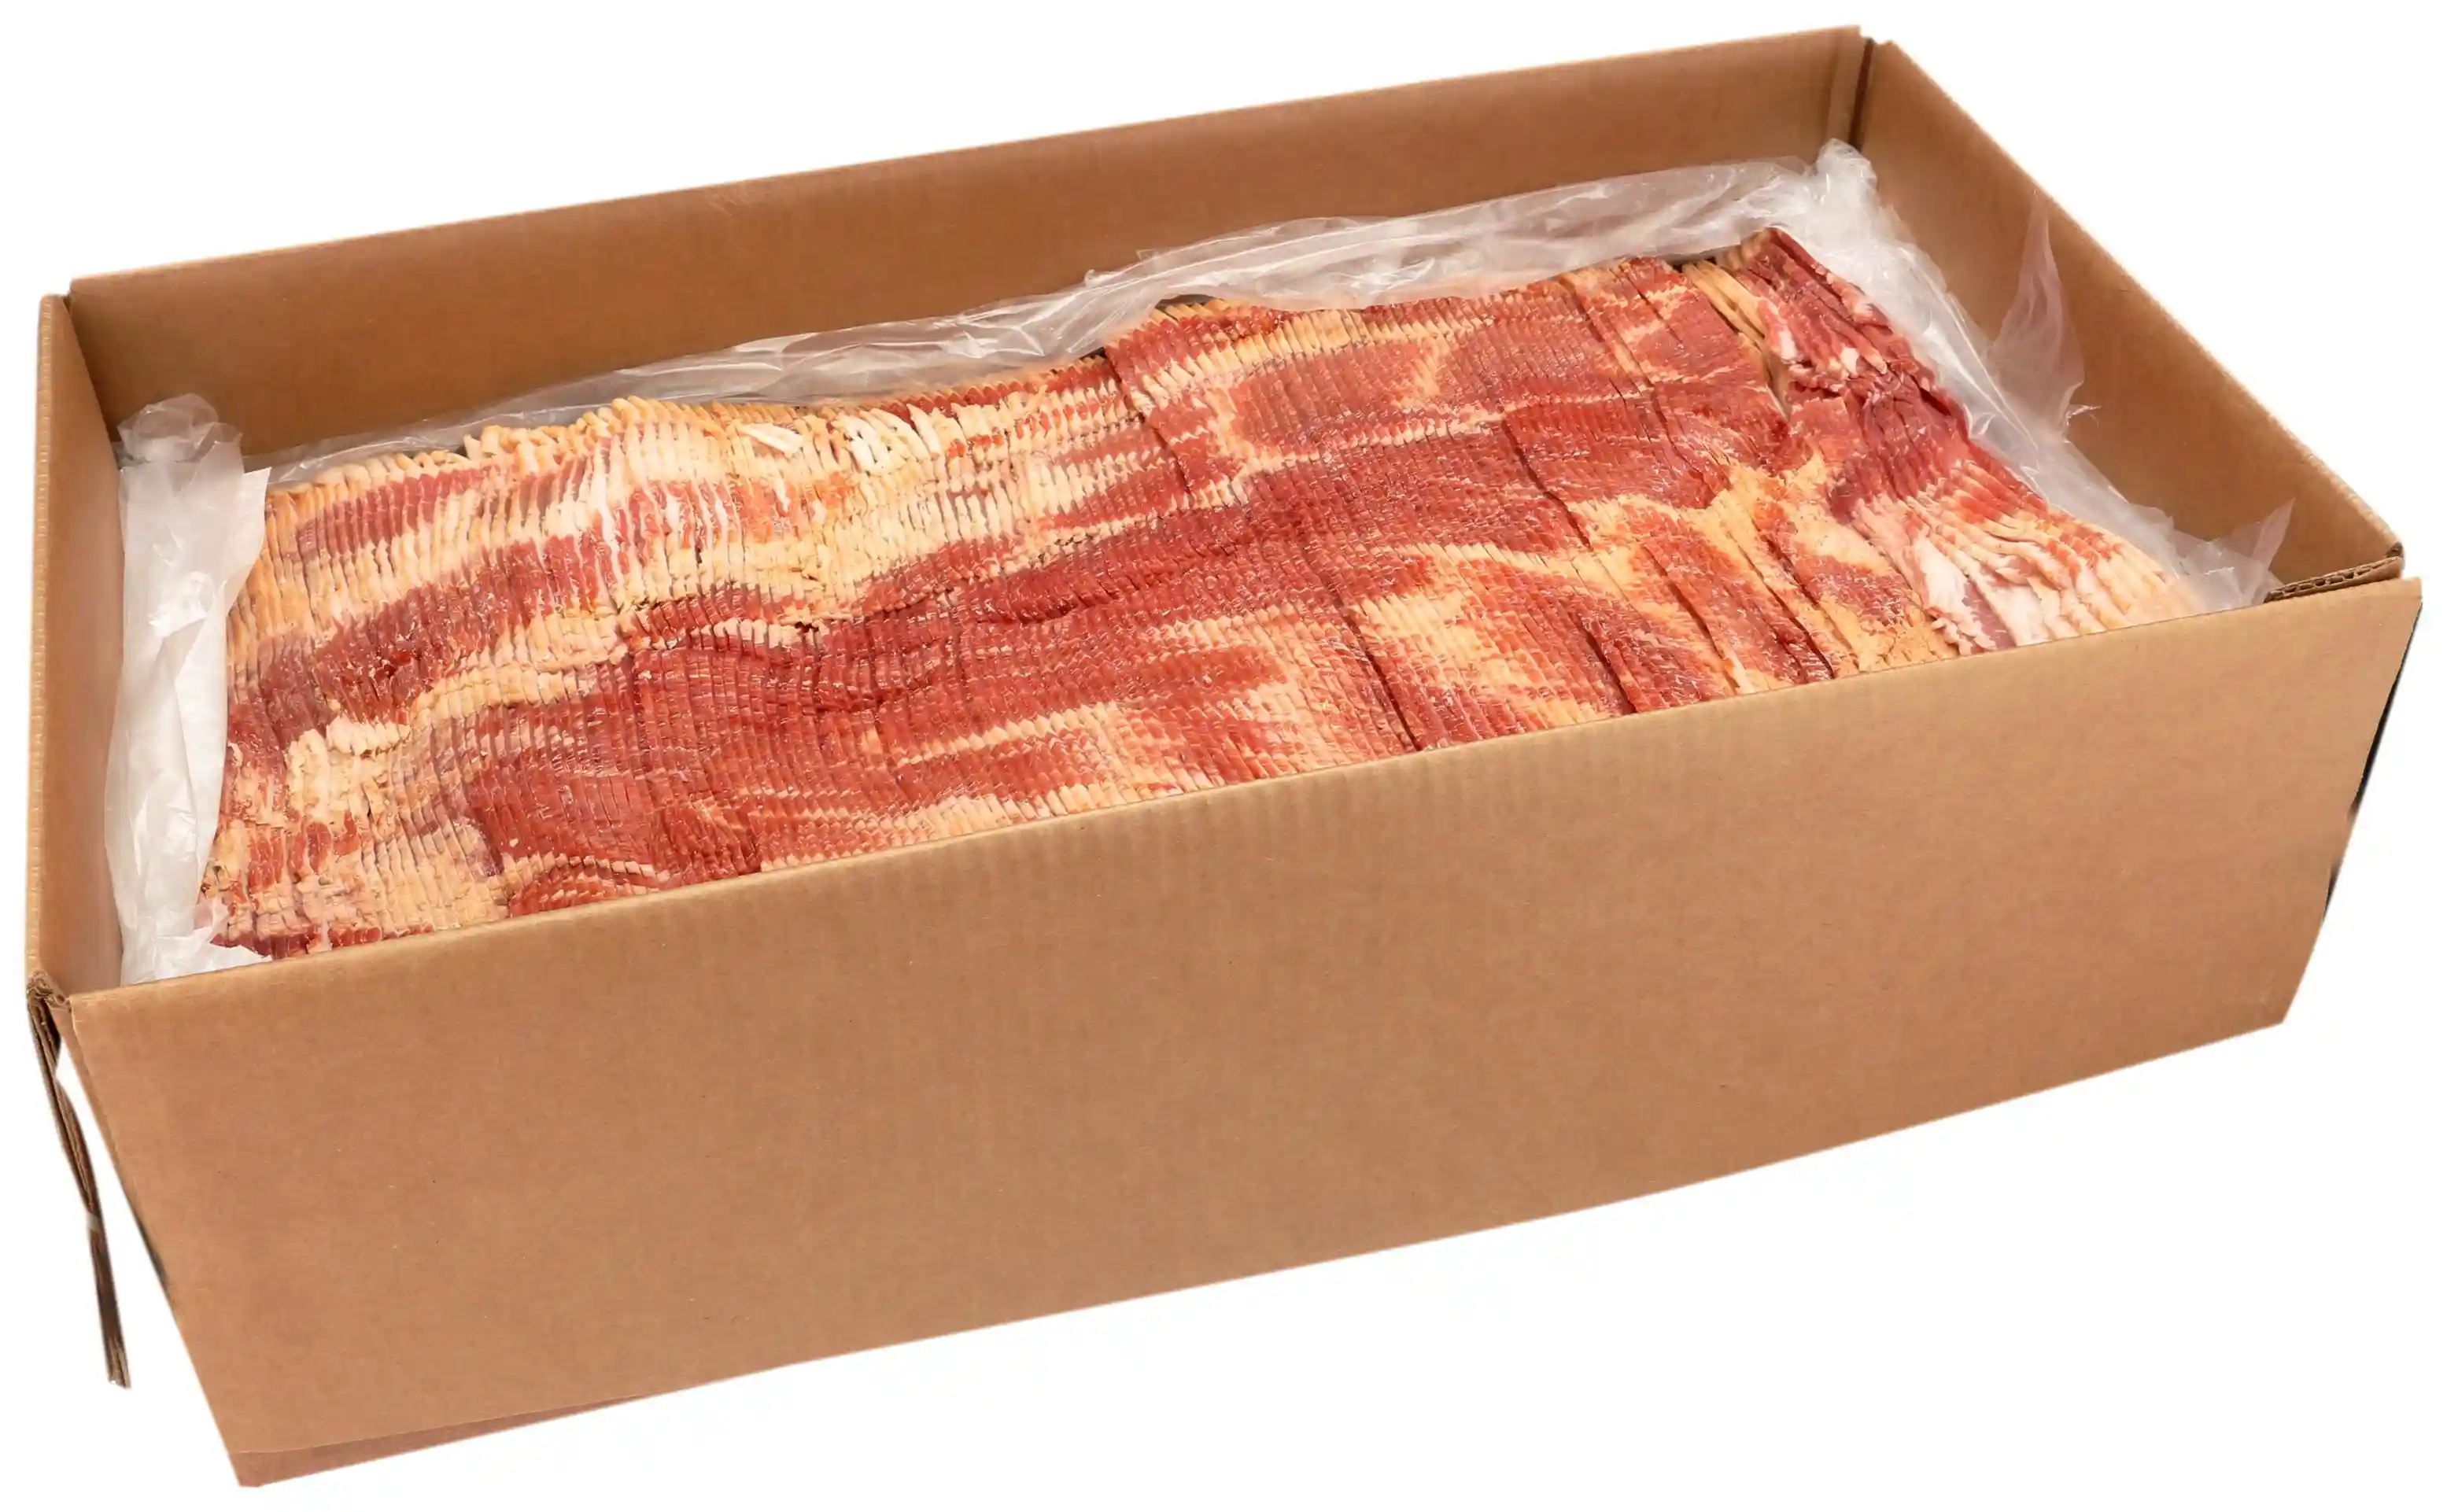 Wright® Brand Naturally Hickory Smoked Thin Sliced Bacon, Bulk, 15 Lbs, 18-22 Slices Per Pound, Frozen_image_41